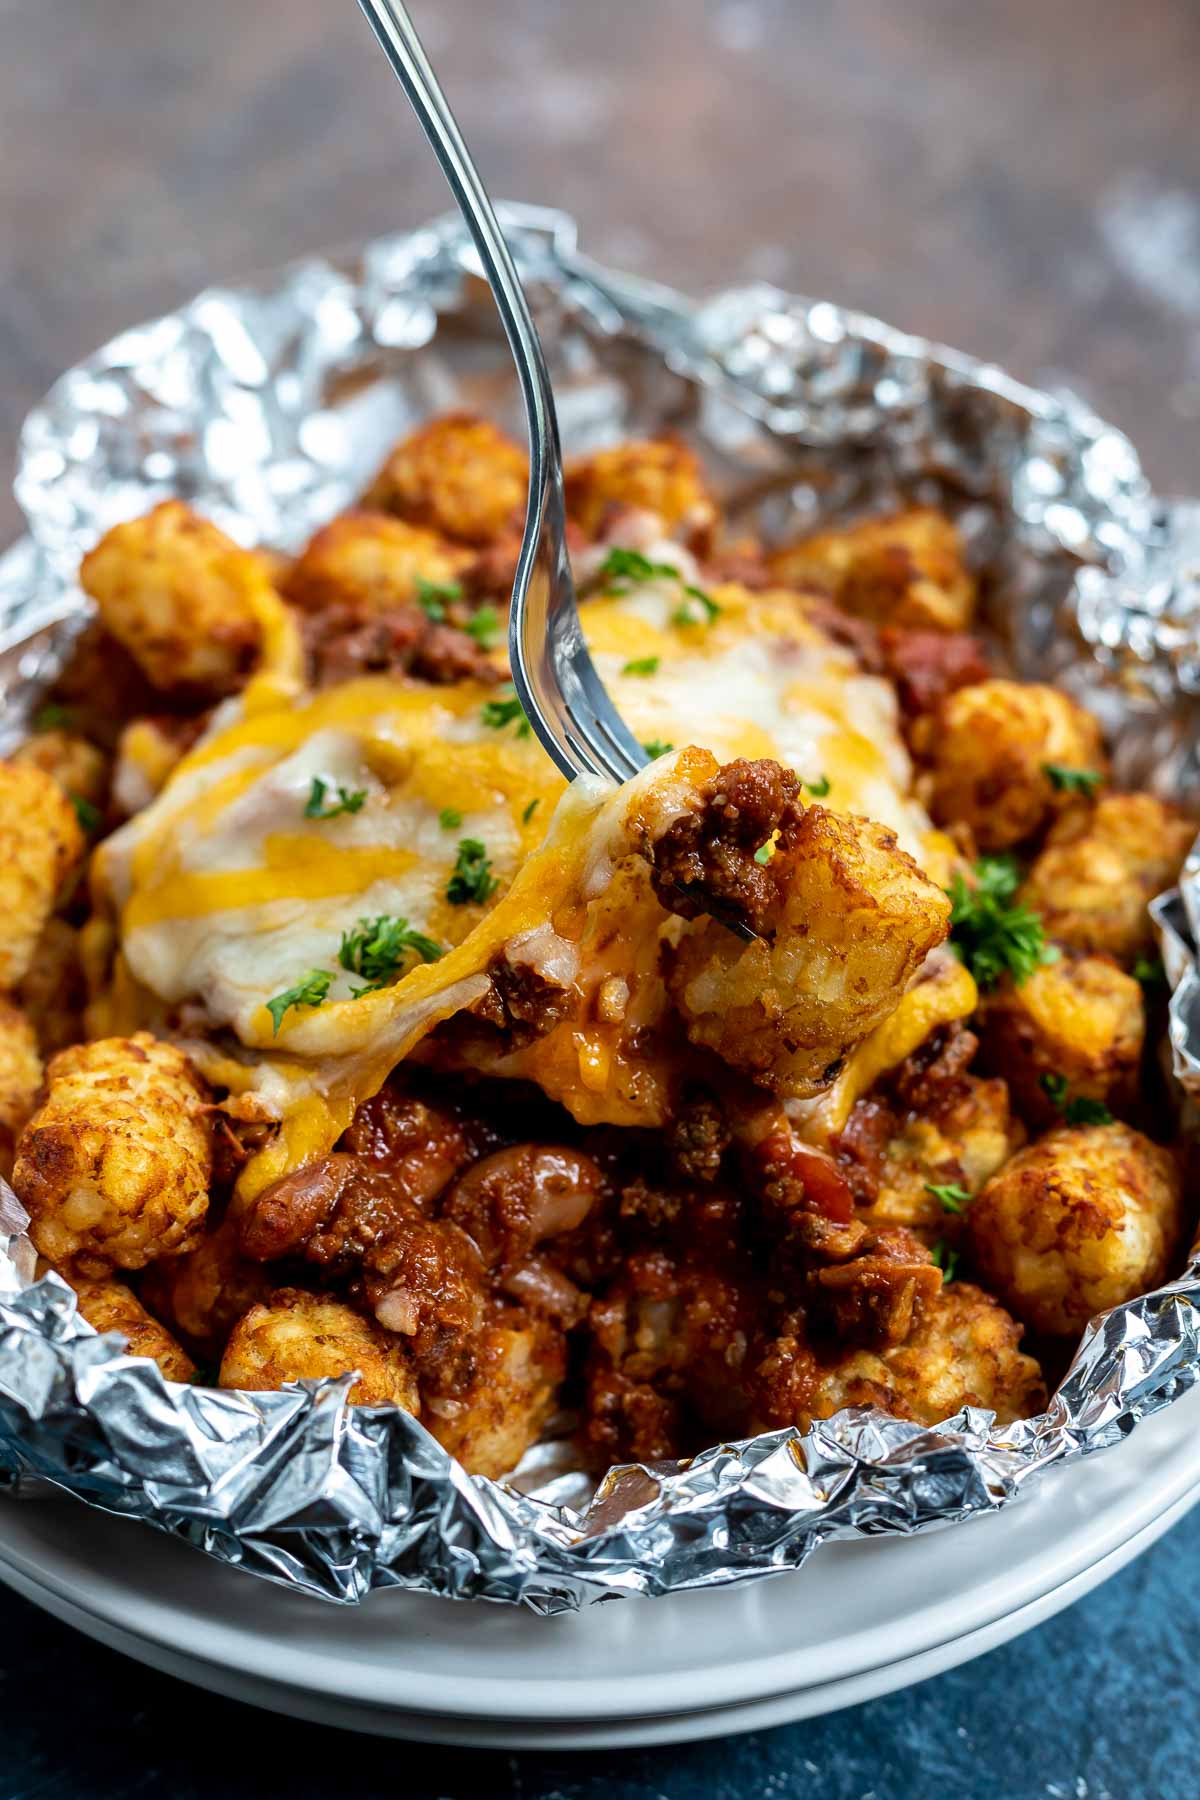 Cracked Out Chicken Tater Tot Casserole Recipe - Health 